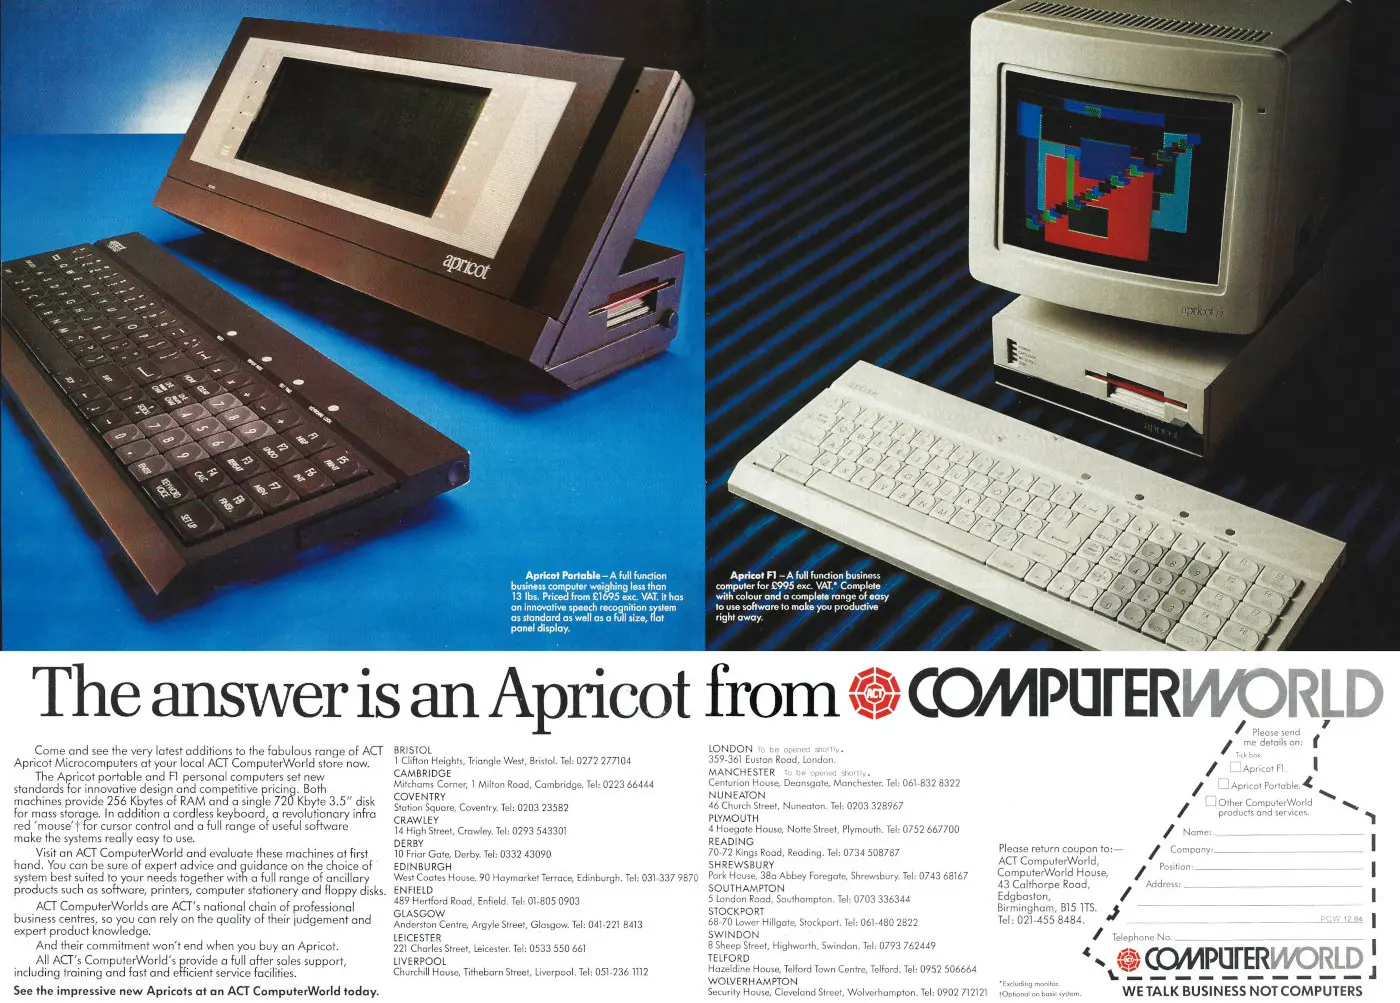 ACT/Apricot Advert: The answer is an Apricot from ComputerWorld, from Personal Computer World, December 1984